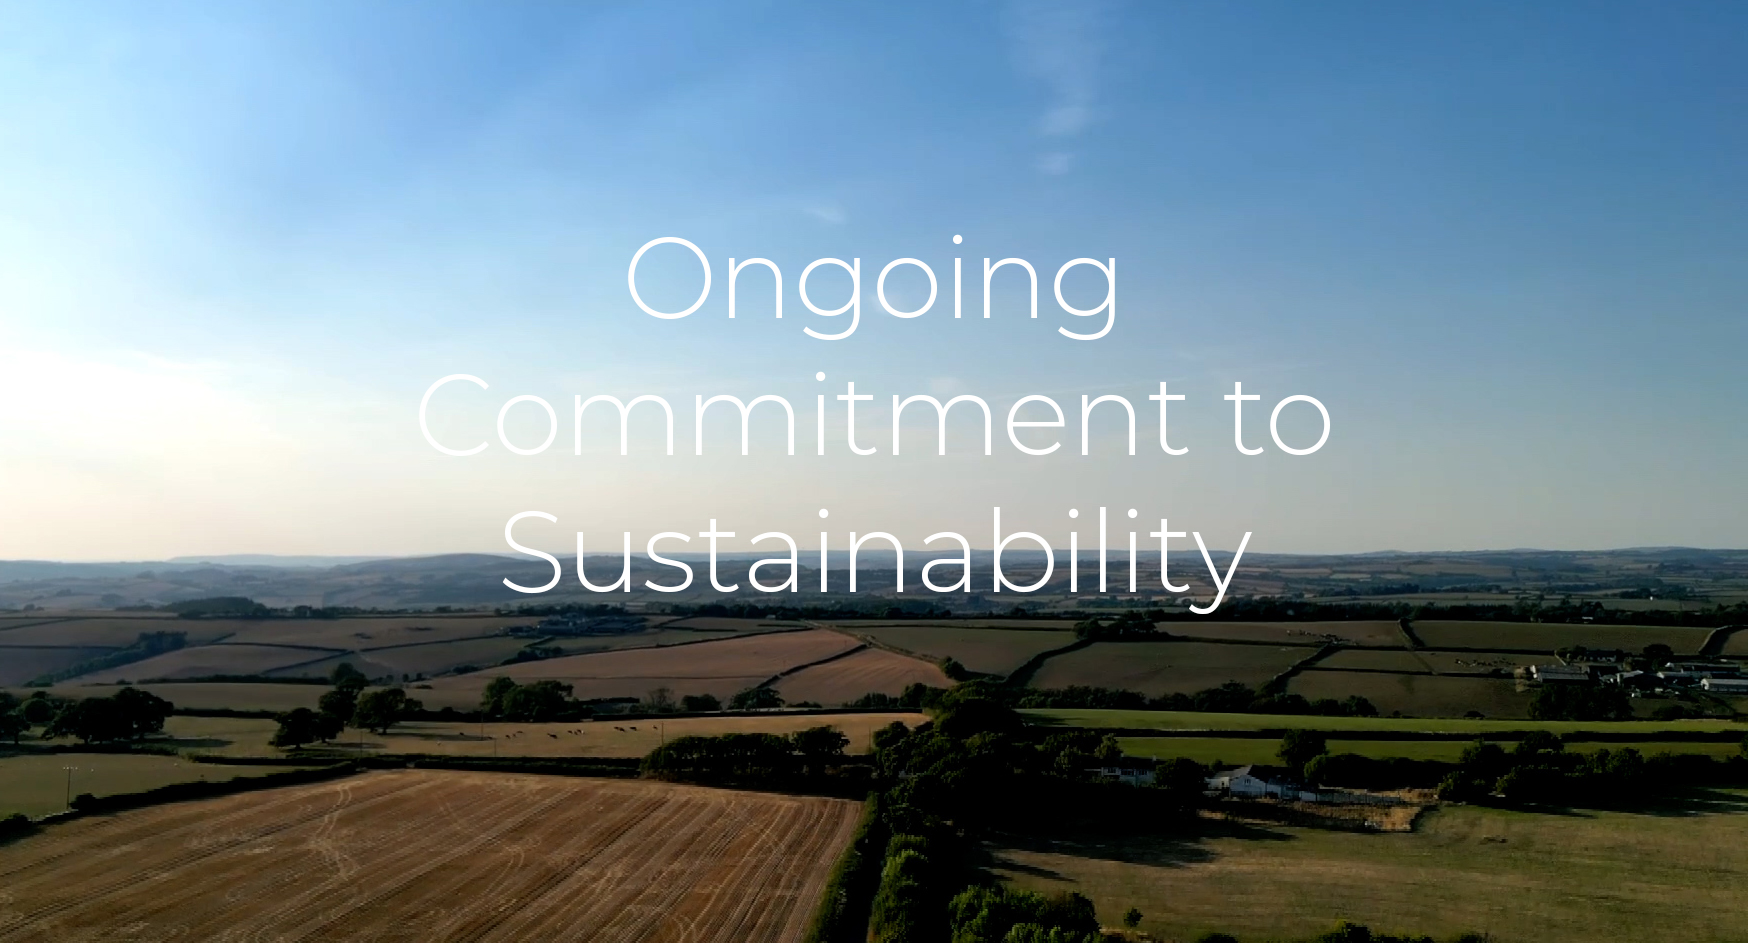 Dartington Crystal's Ongoing Commitment to Sustainability